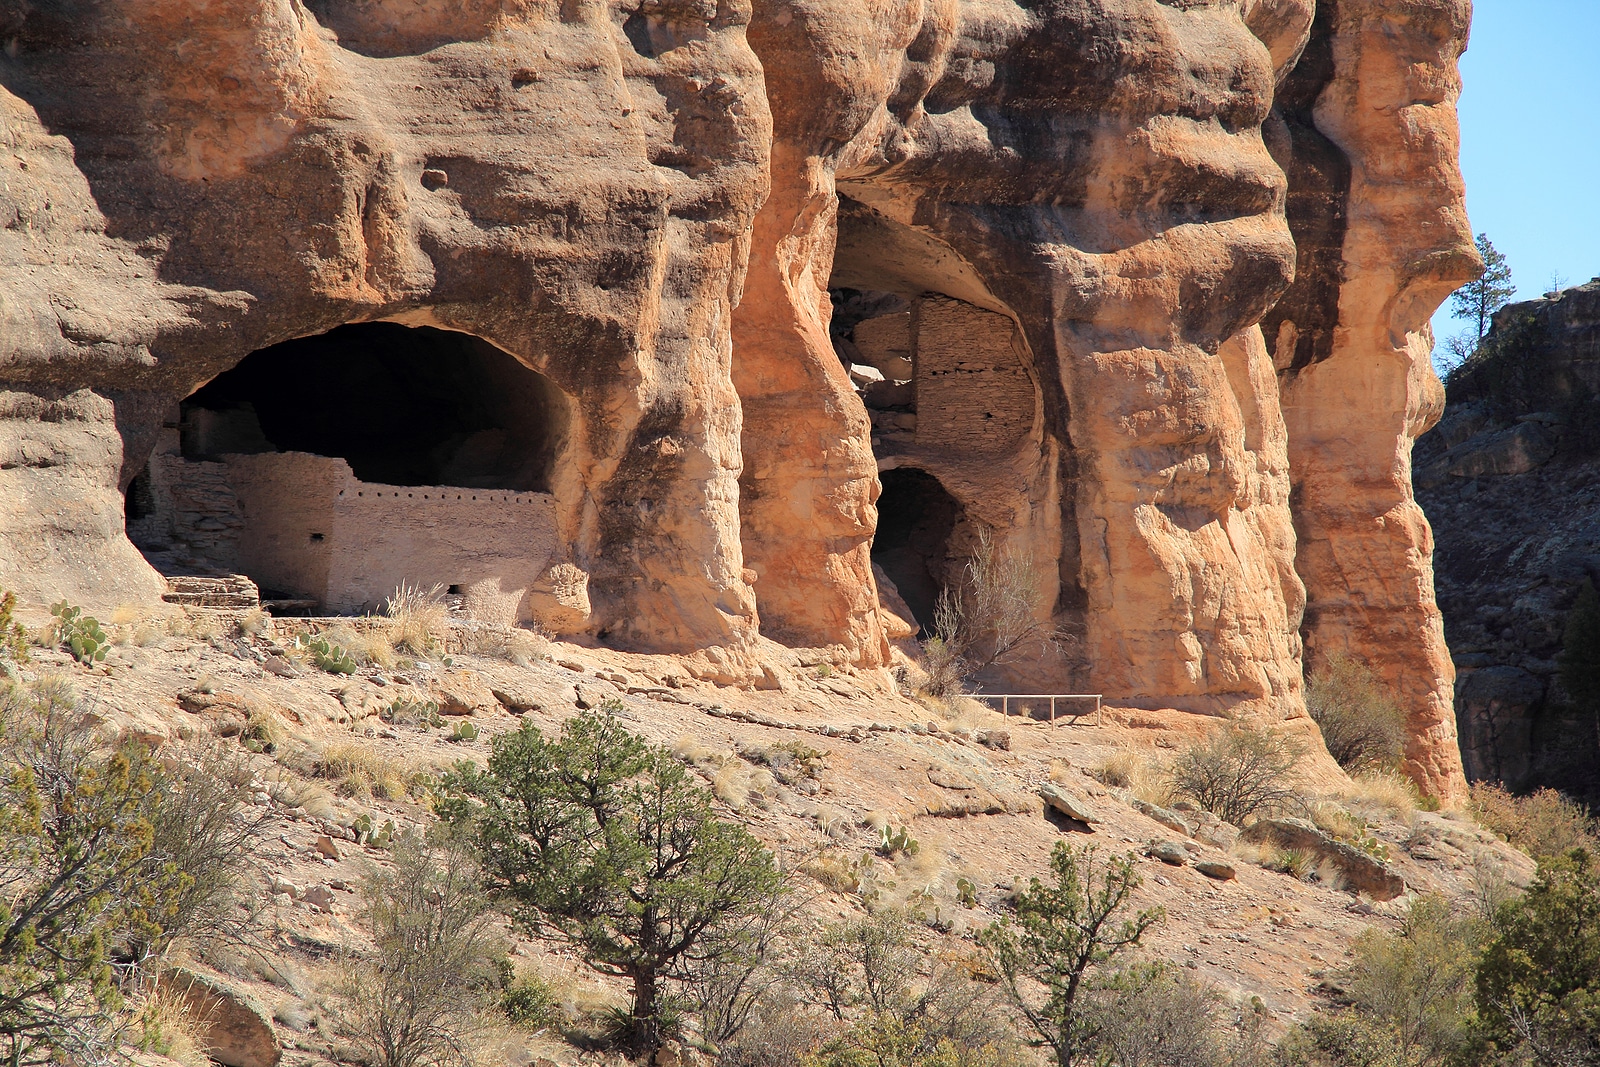 Ancient Mogollon Ruins at Gila Cliff Dwellings National Monument in the Gila National Forest, New Mexico